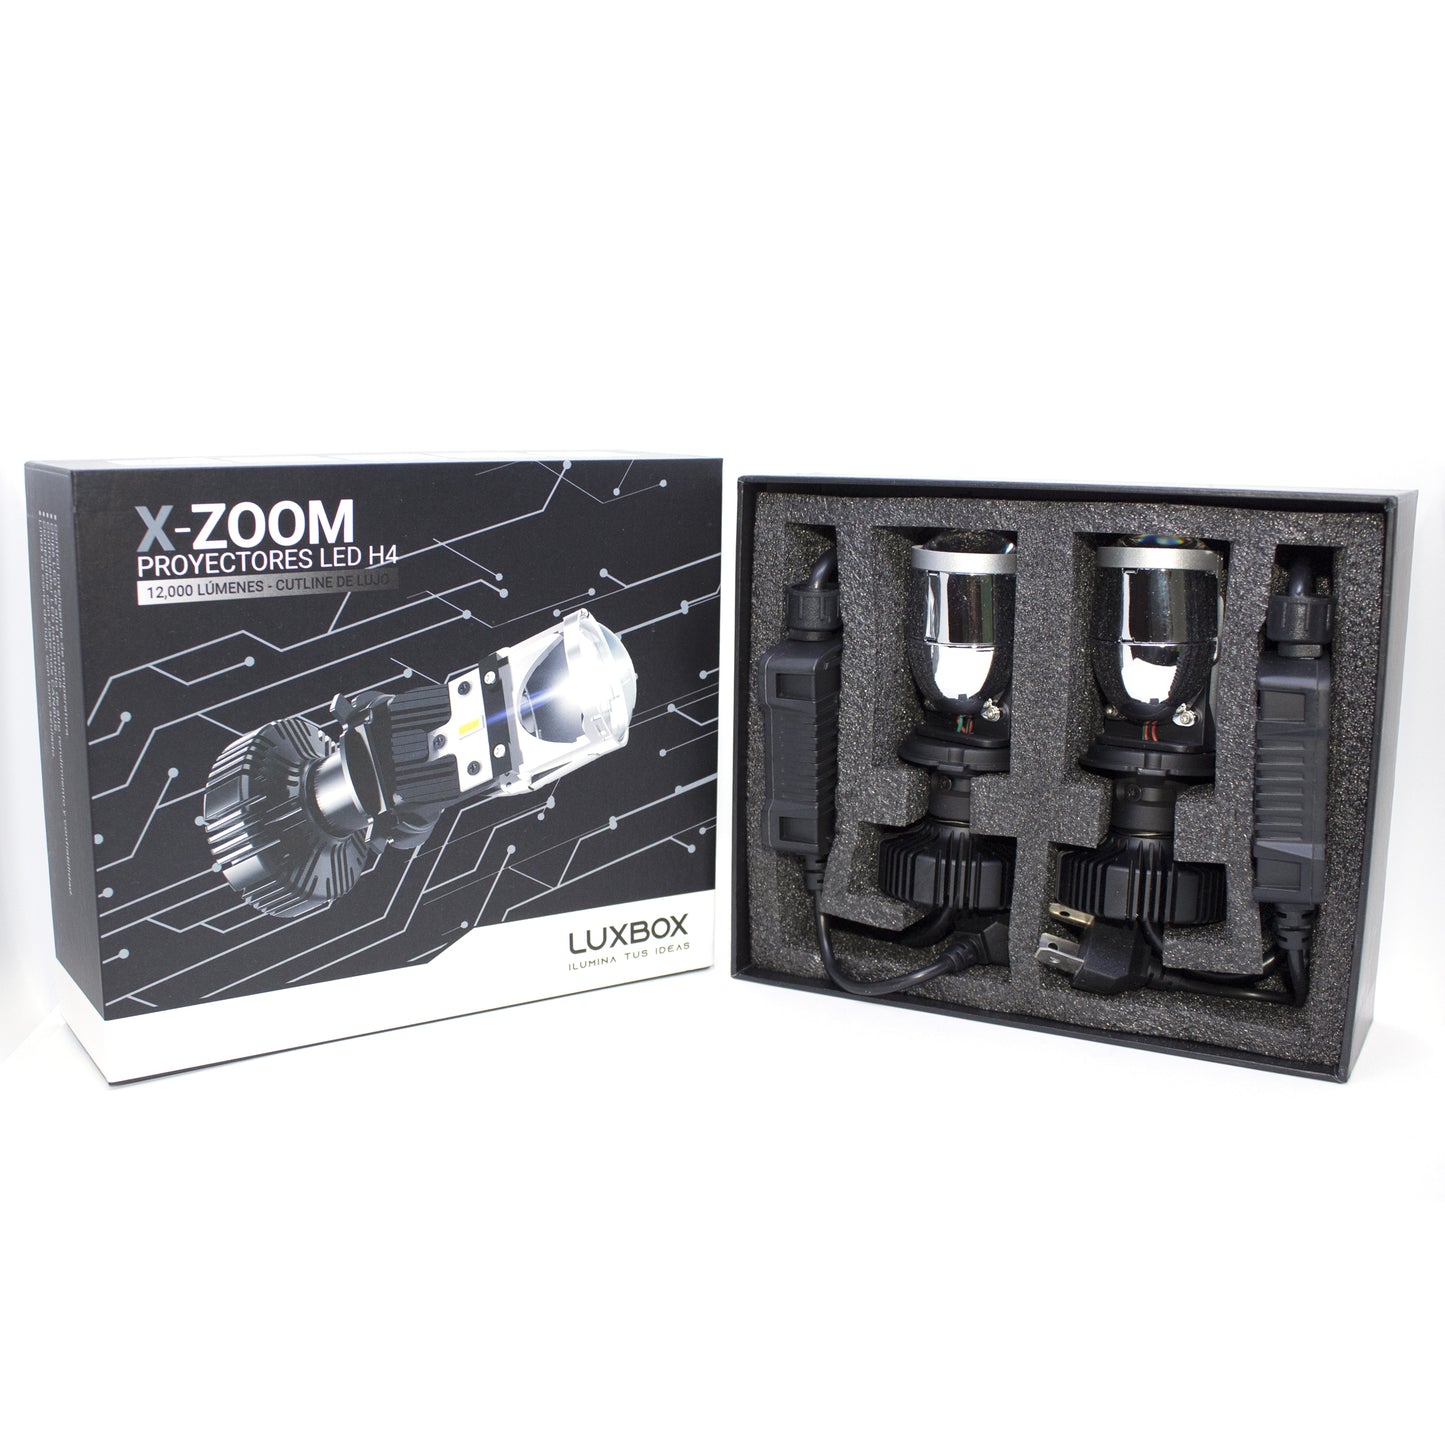 Proyectores LED H4 XZOOM